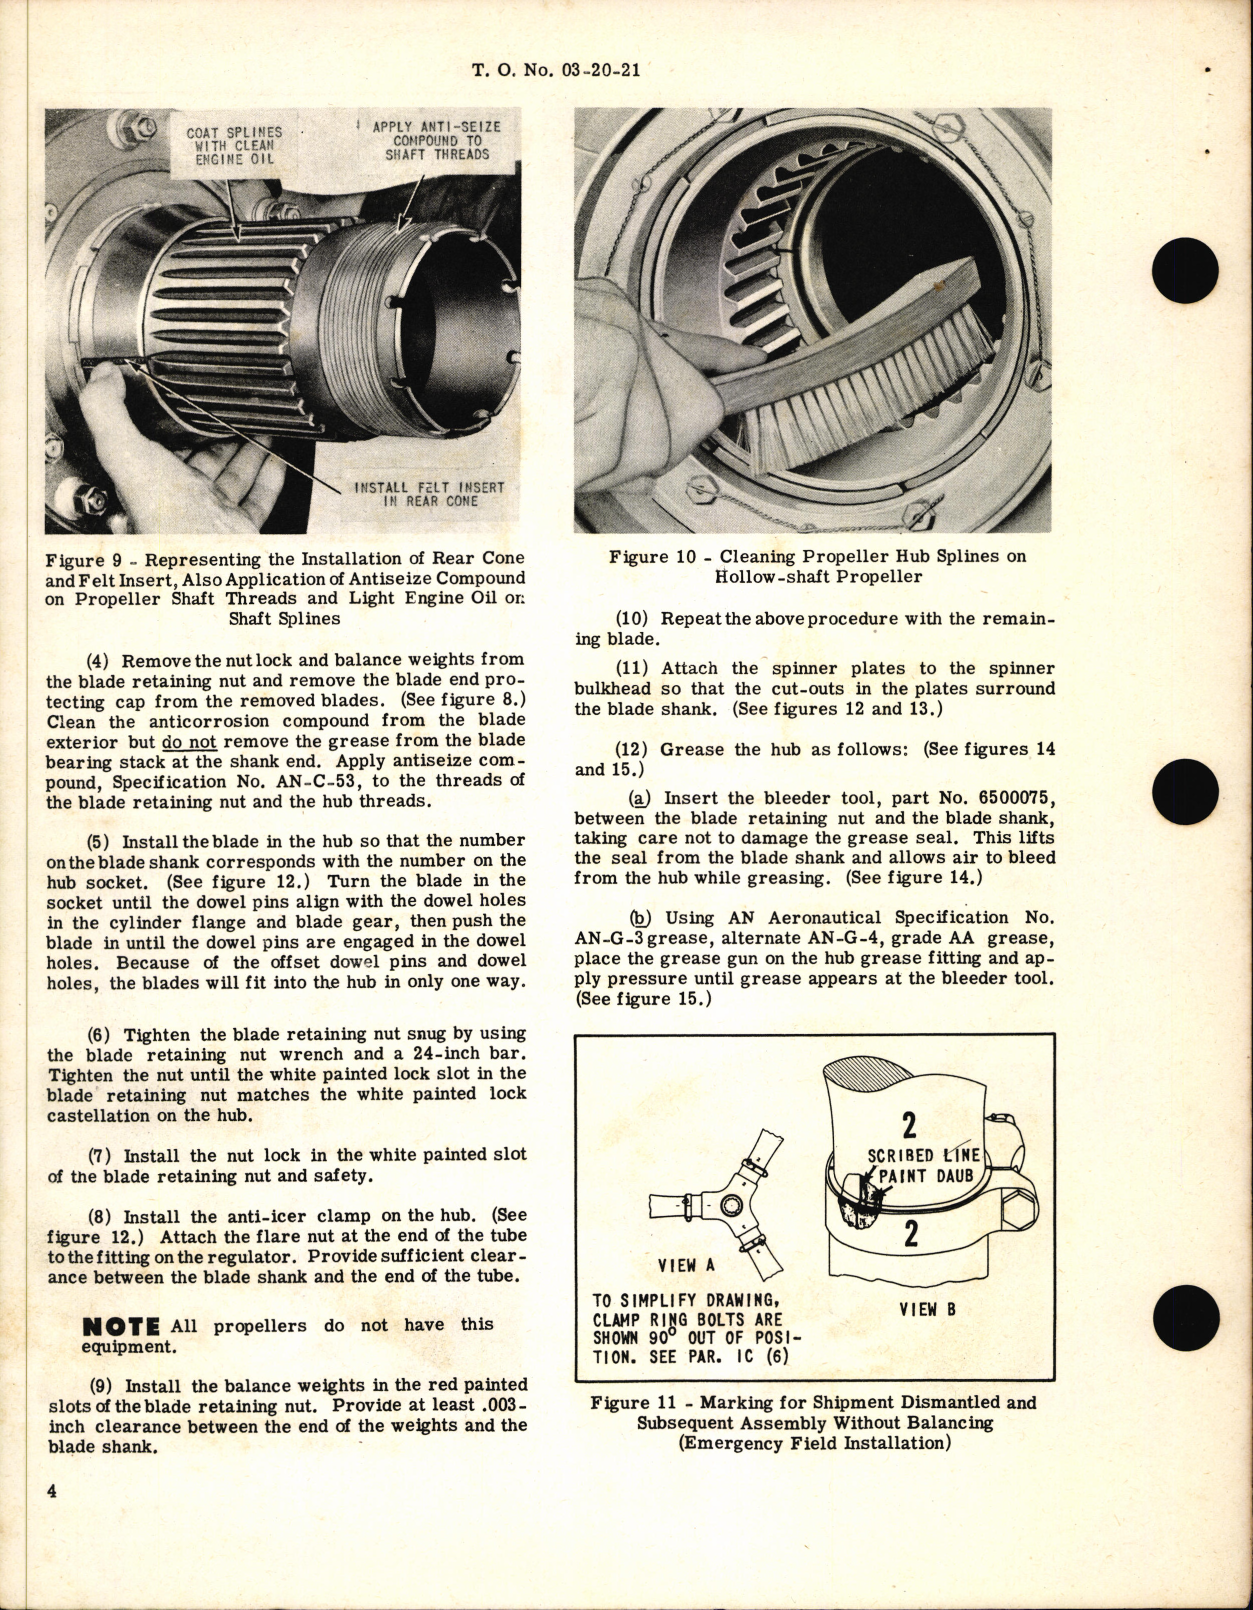 Sample page 4 from AirCorps Library document: Propellers and Accessories - Shipment of Disassembled Propellers 